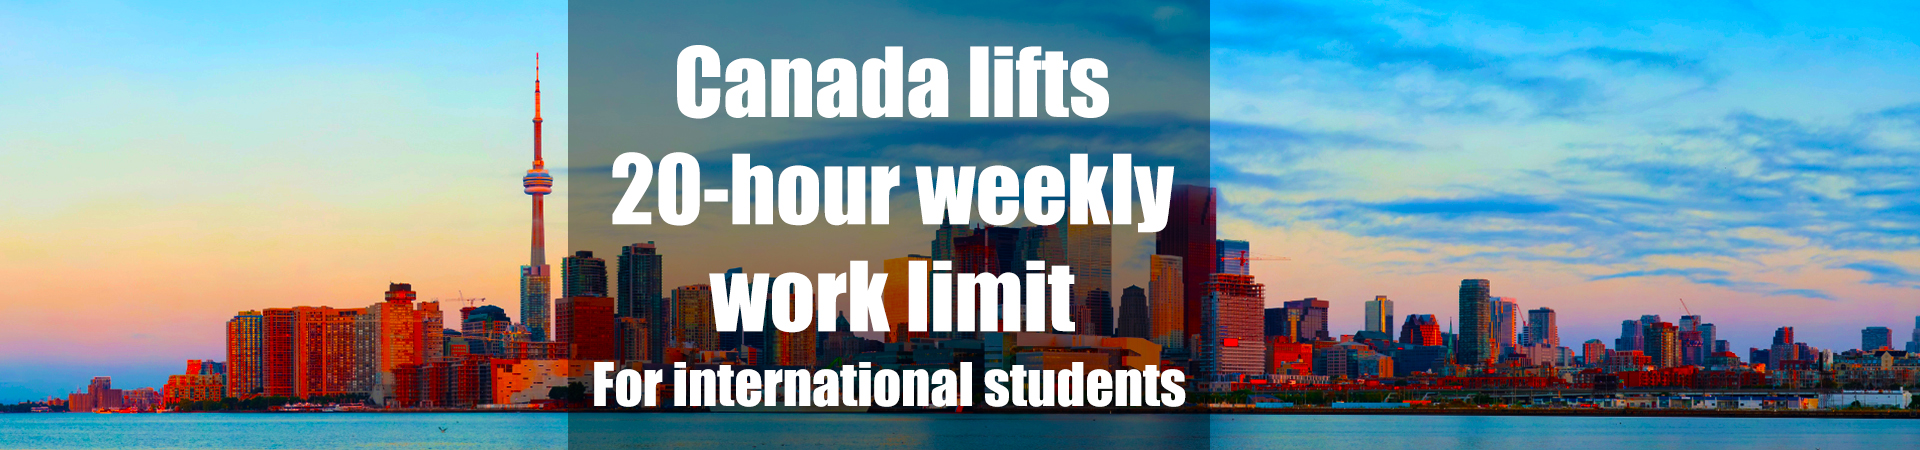 Canada lifts 20-hour weekly work limit for international students 